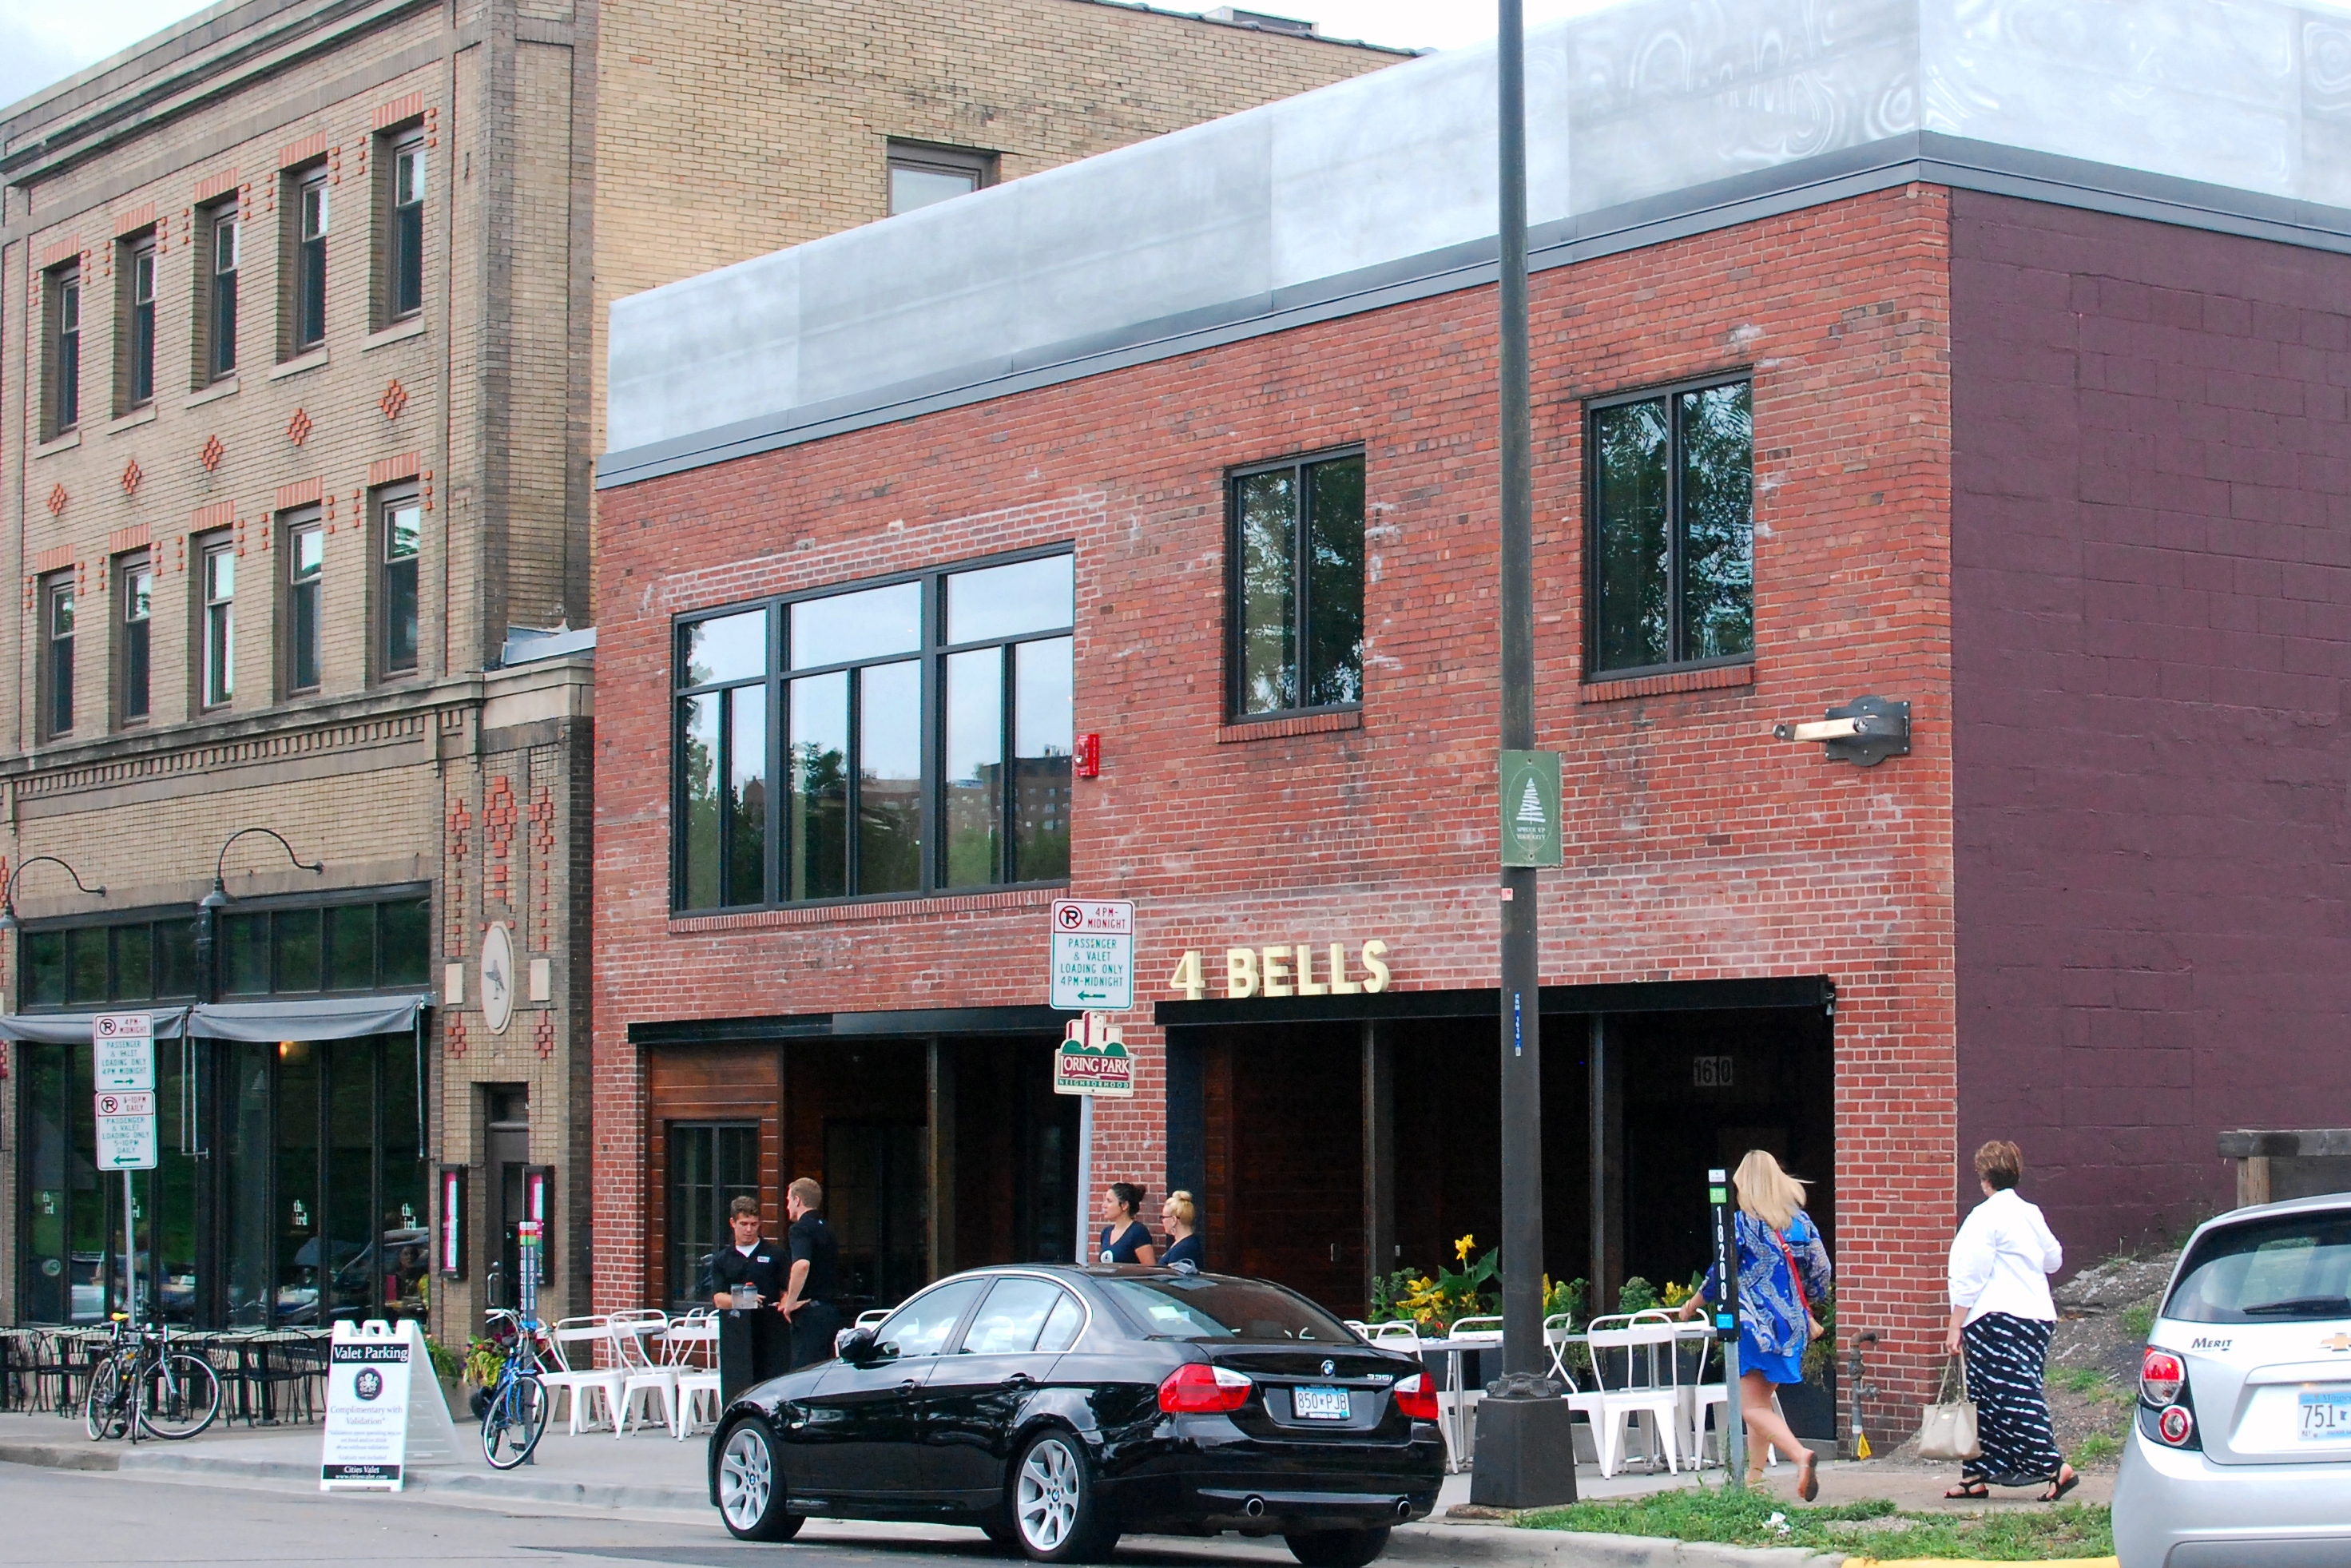 The exterior of 4 Bells